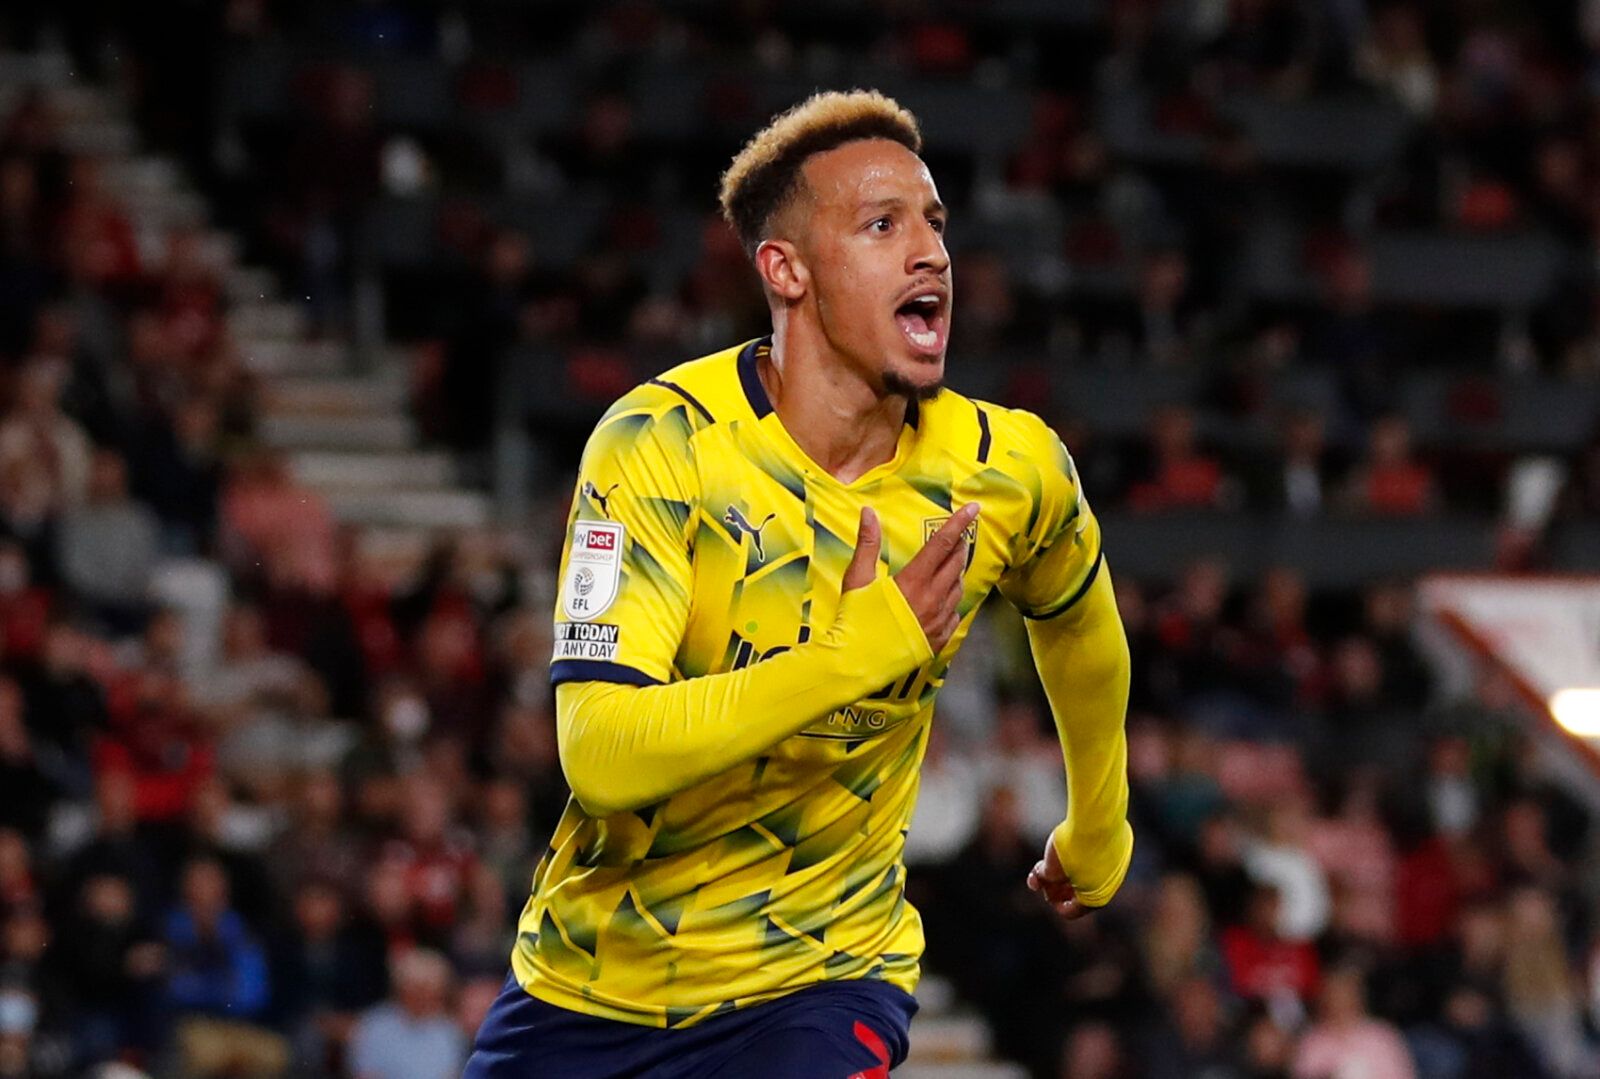 Soccer Football - Championship - AFC Bournemouth v West Bromwich Albion - Vitality Stadium, Bournemouth, Britain - August 6, 2021 West Bromwich Albion's Callum Robinson celebrates scoring their second goal Action Images/Peter Cziborra